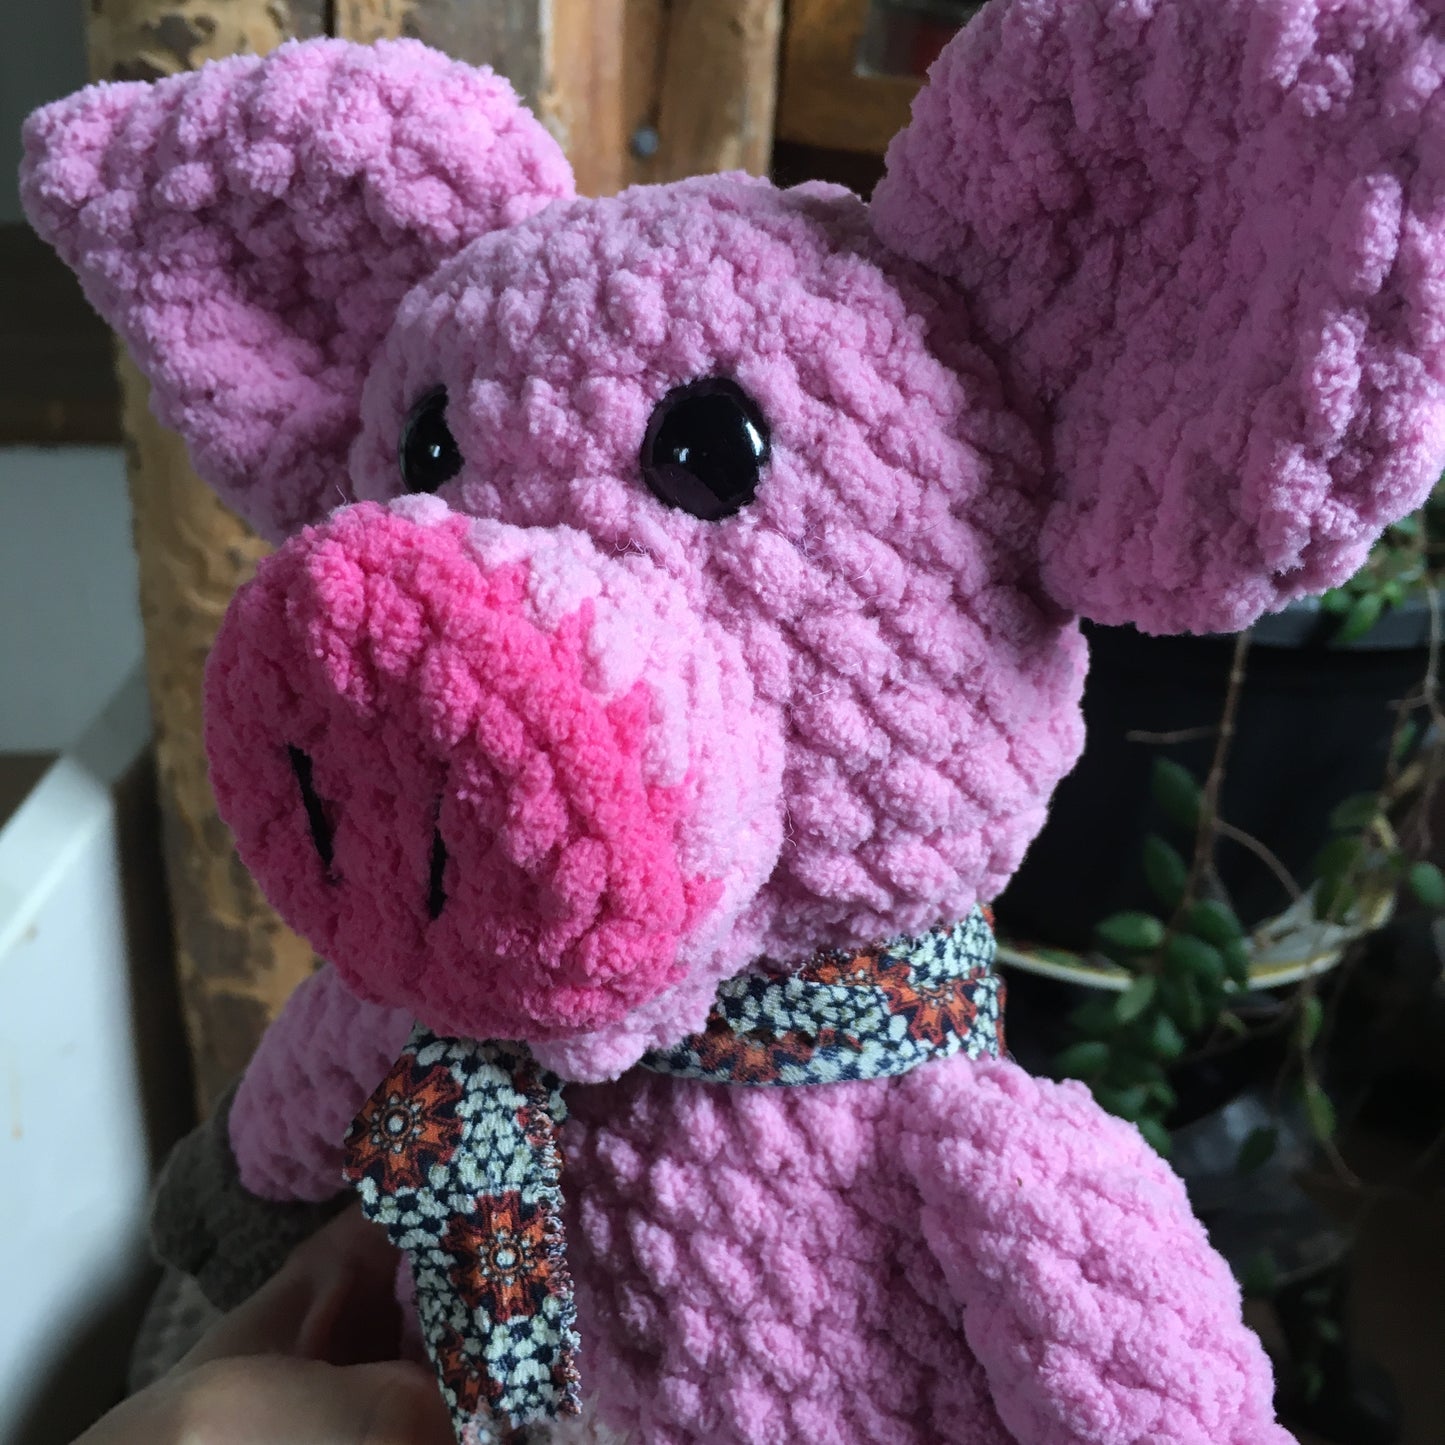 COOKIE the little pink pig